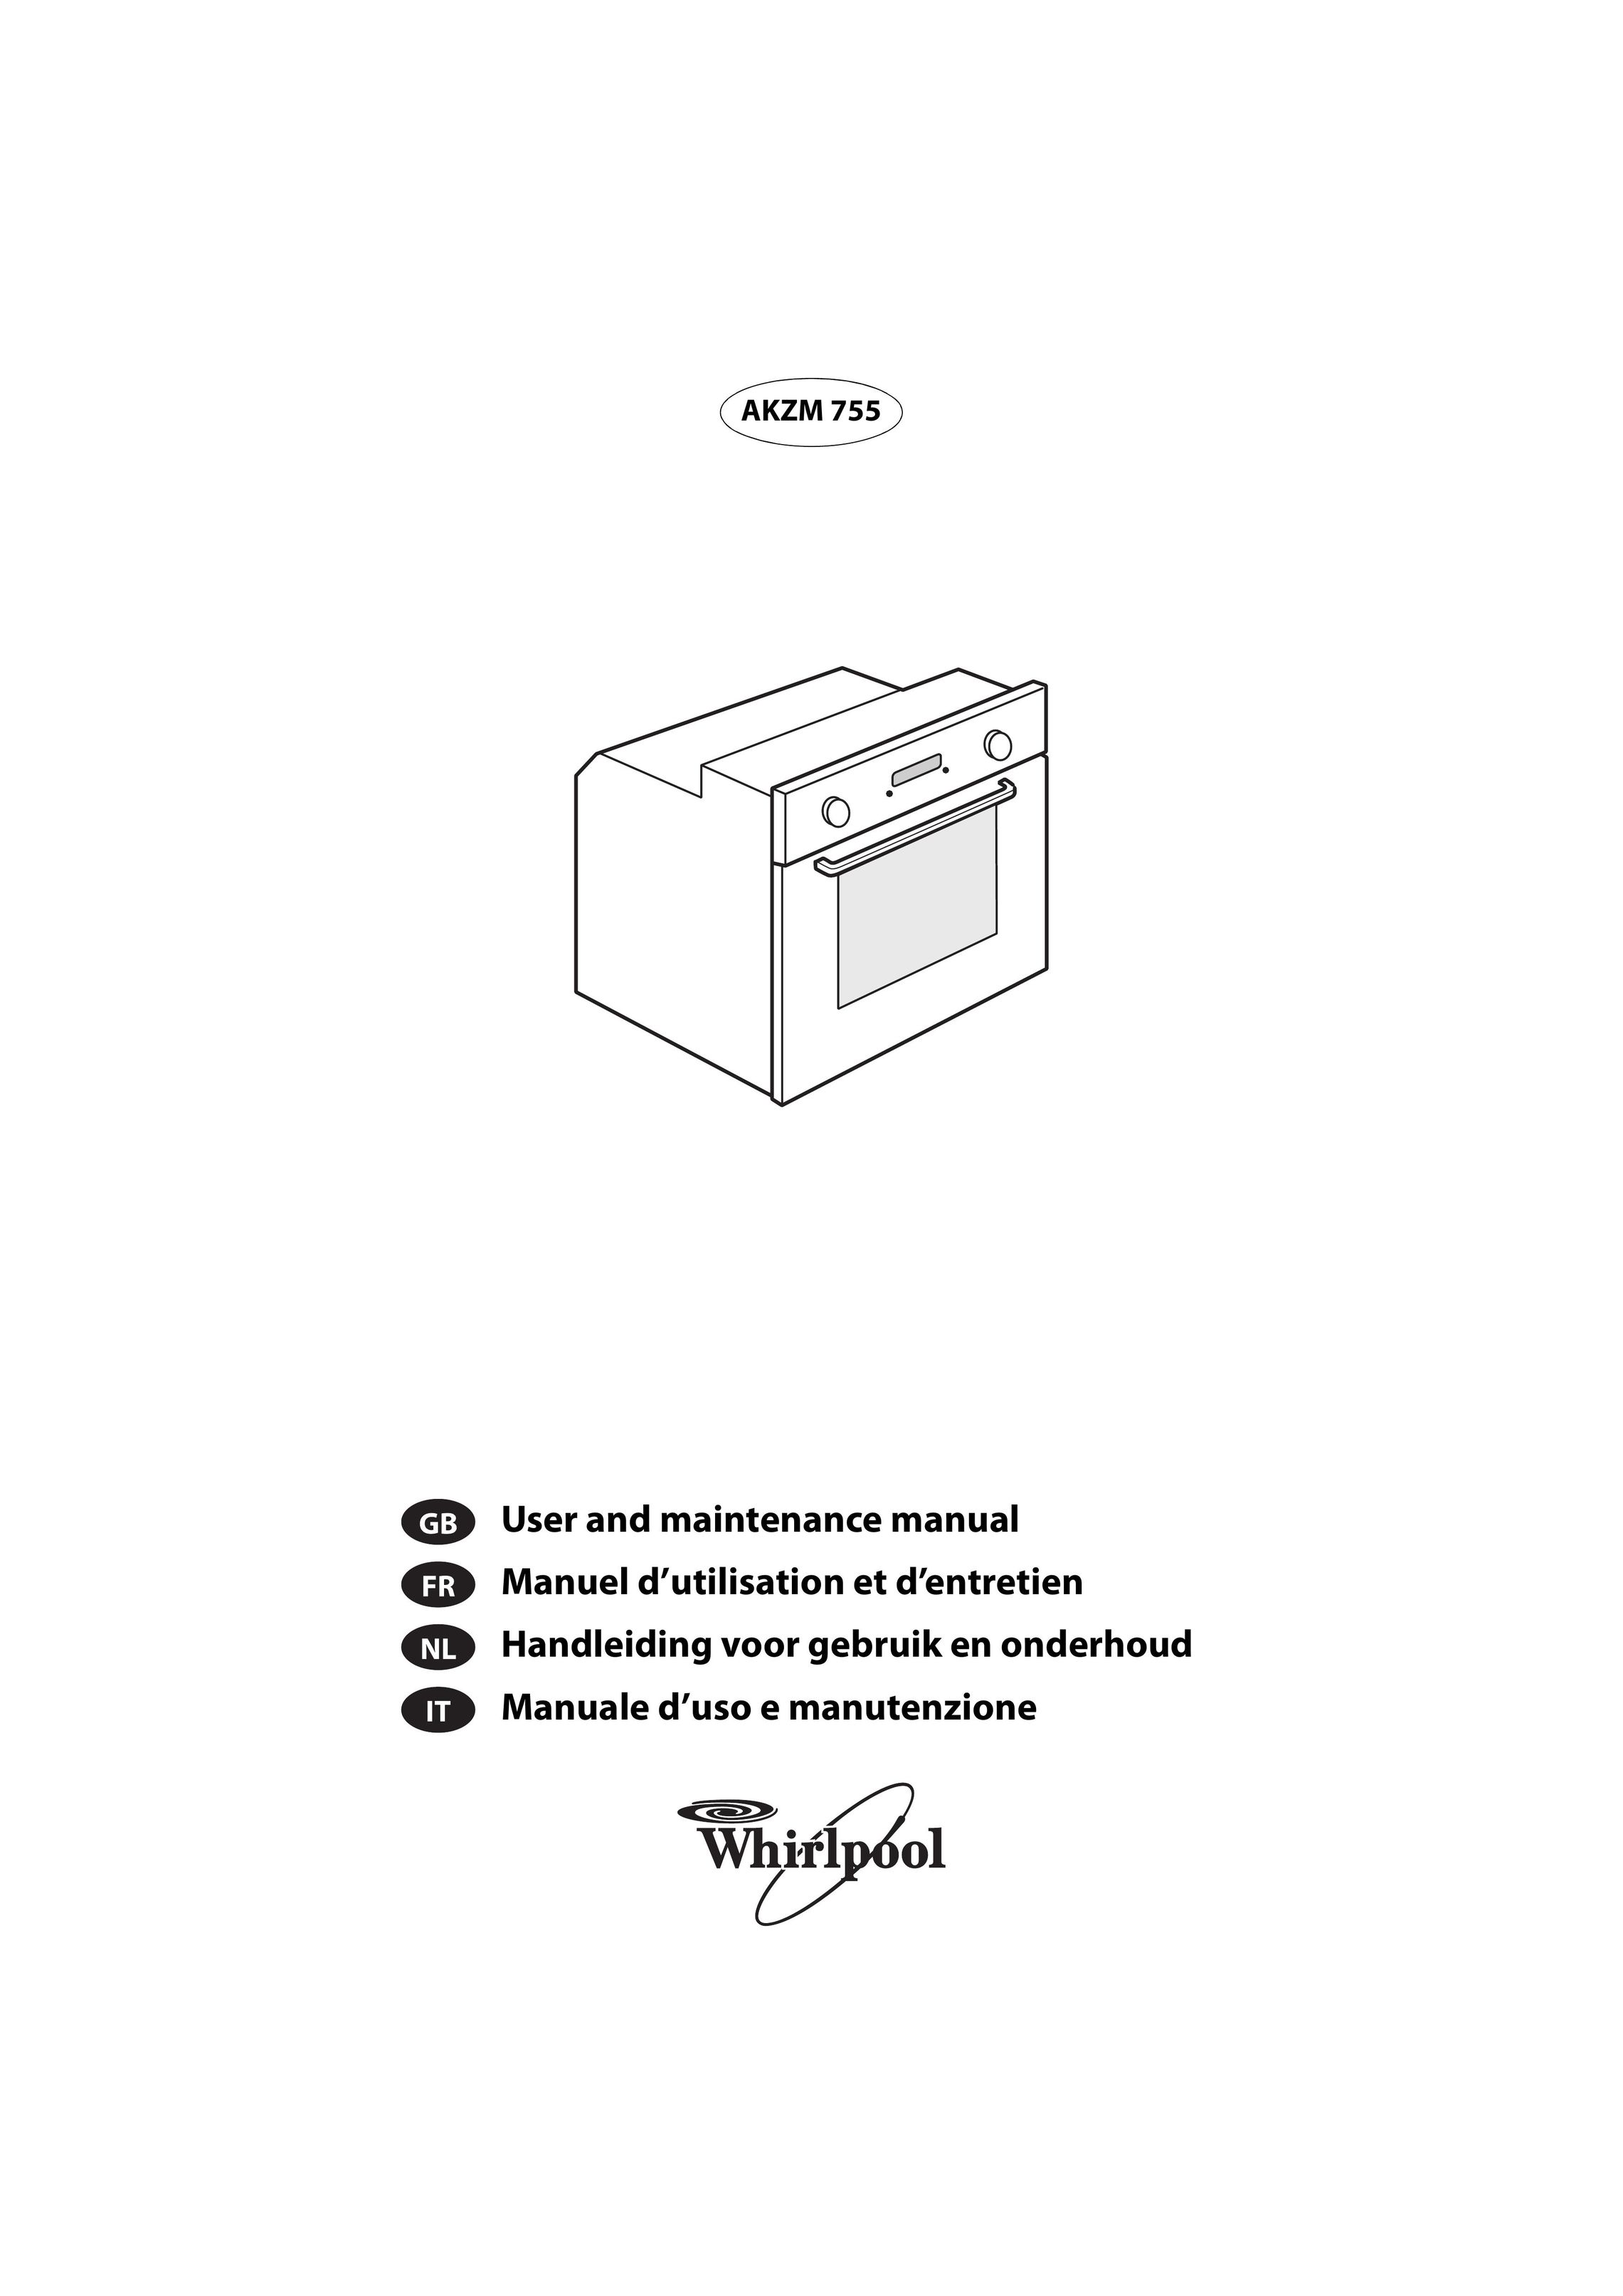 Whirlpool AKZM 755 Double Oven User Manual